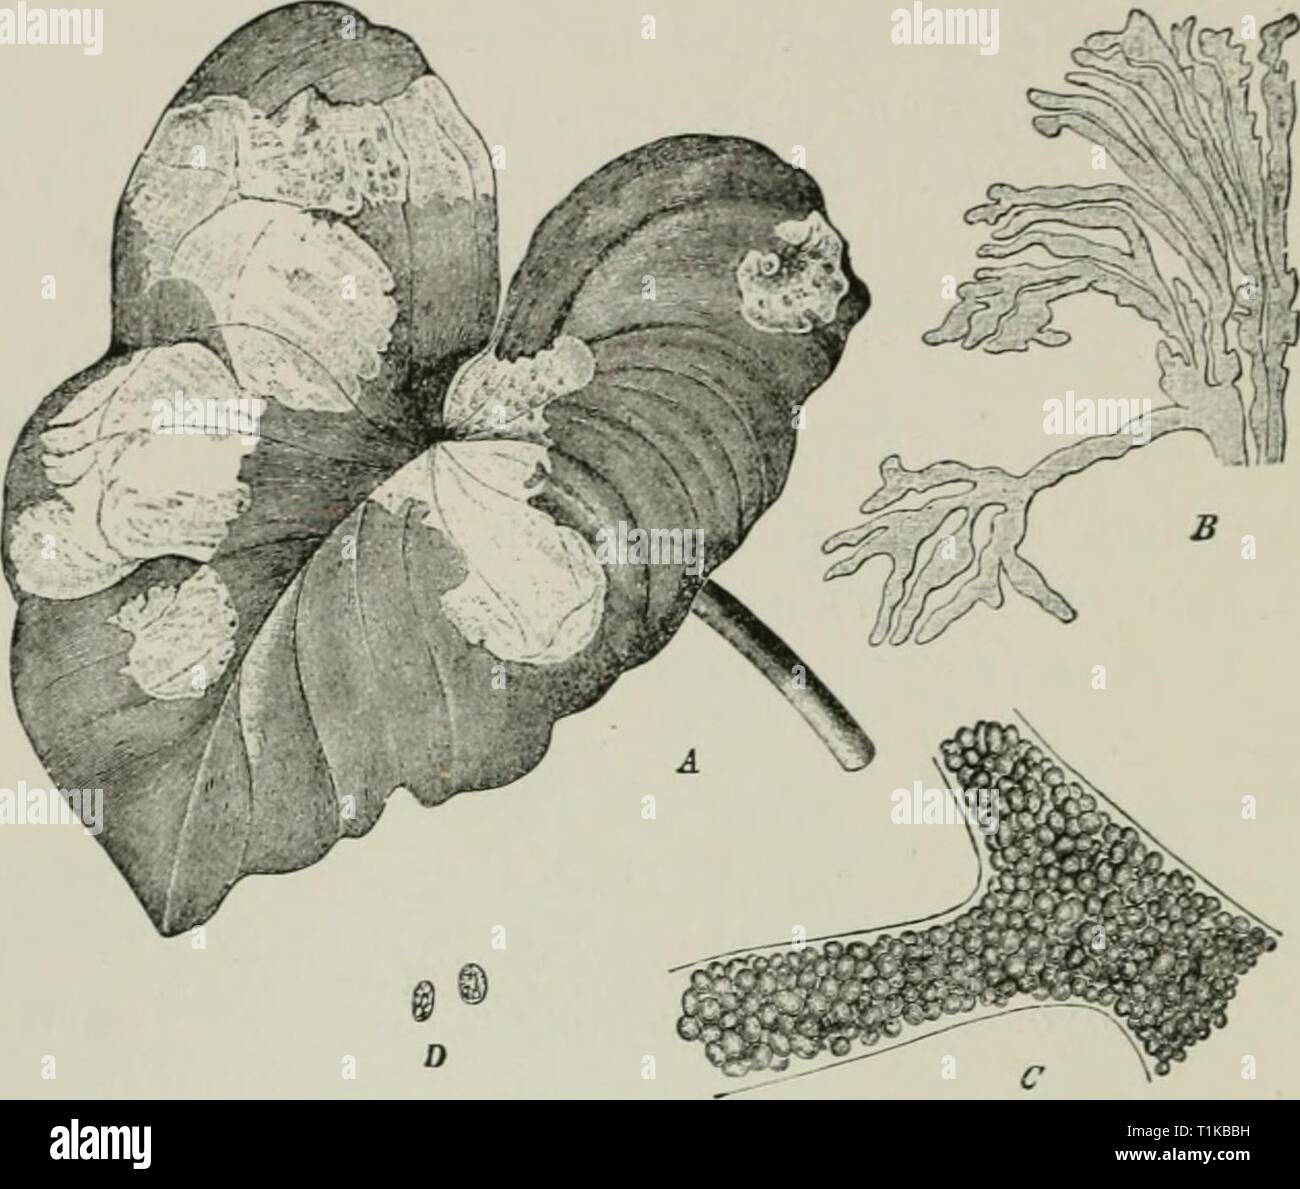 Diseases of plants induced by Diseases of plants induced by cryptogamic parasites; introduction to the study of pathogenic Fungi, slime-Fungi, bacteria, & Algae  diseasesofplant00tube Year: 1897  554 TKK PATHOfJENIC ALGAE. Parts of the leaf and petiole inhabited by thi.s alga appear externally as yellow spots. Only one individual alga inhabits each spot, sending its numerous branches into the intercellular spaces. Attacked leaf-cells lose their chlorophyll and starch, the latter being at first replaced by oil. The cells, however, remain alive and turgescent, even when deprived of almost their  Stock Photo